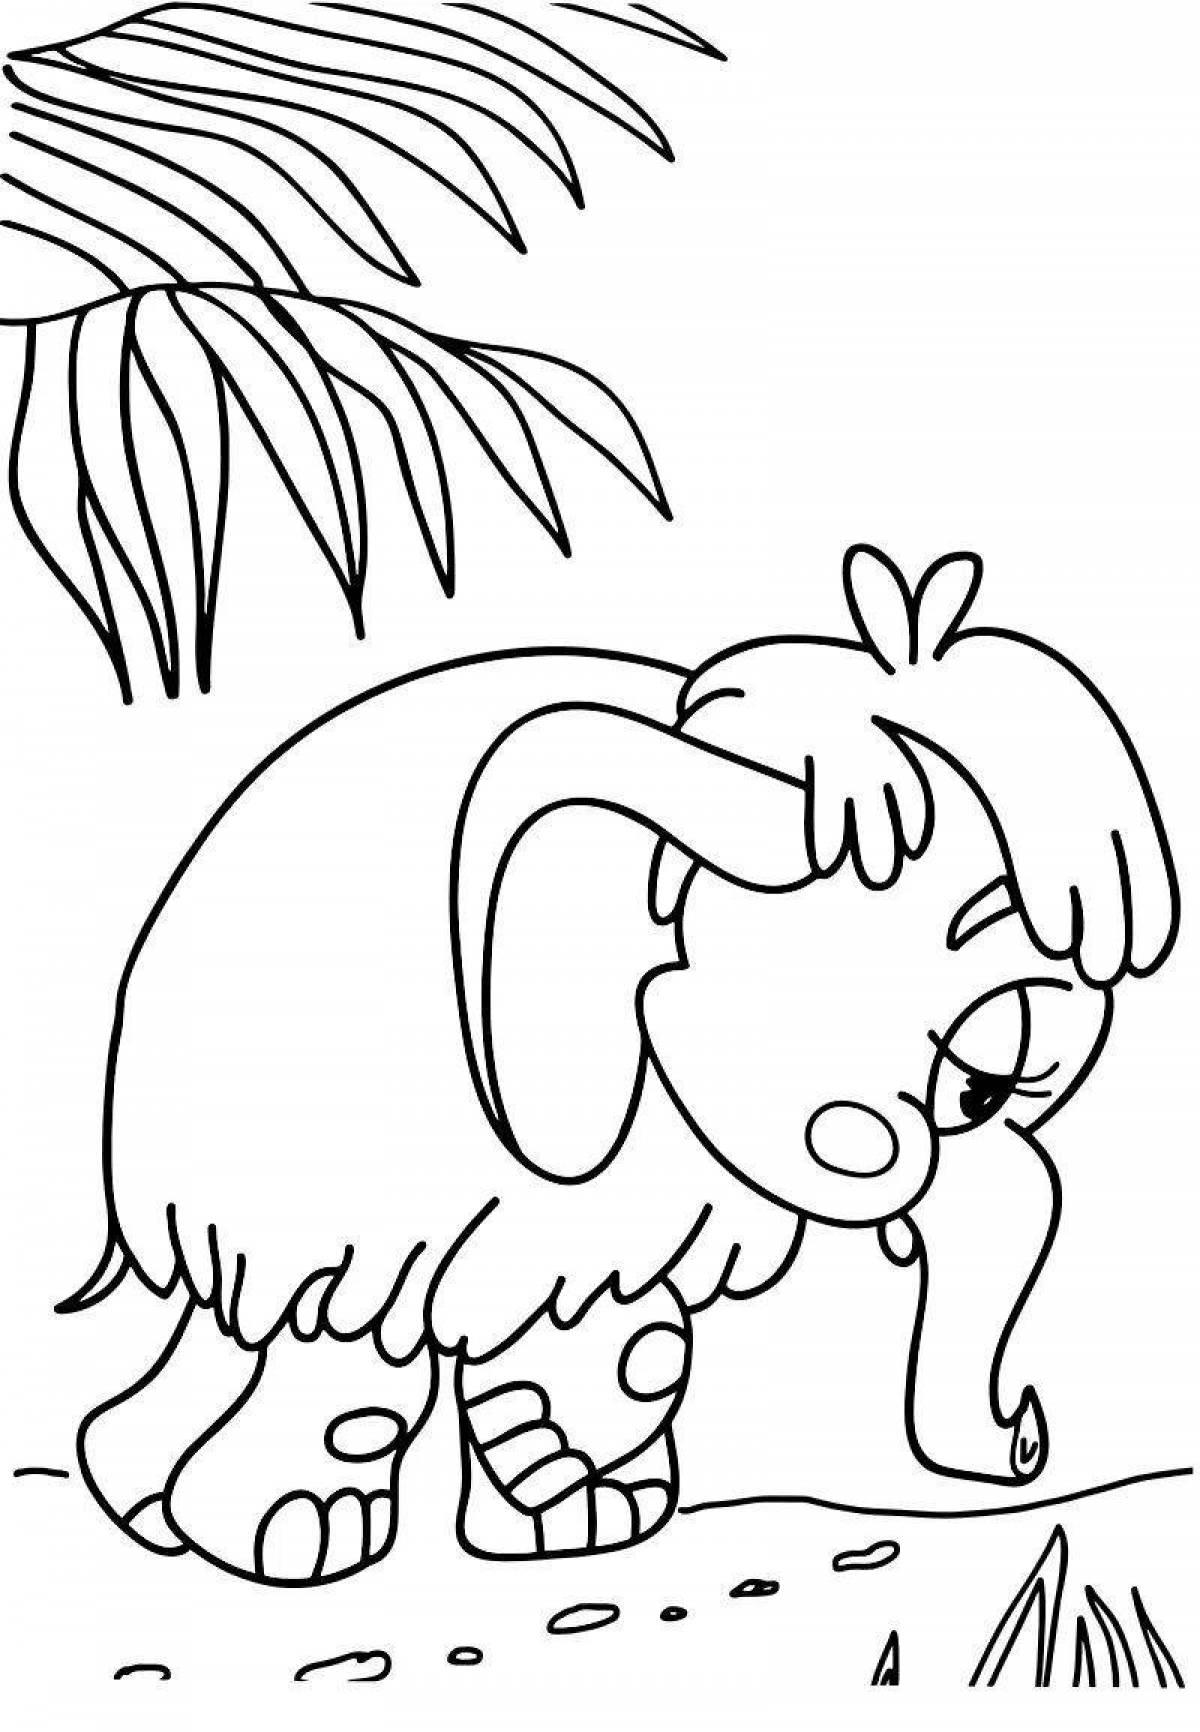 Coloring mammoth for kids